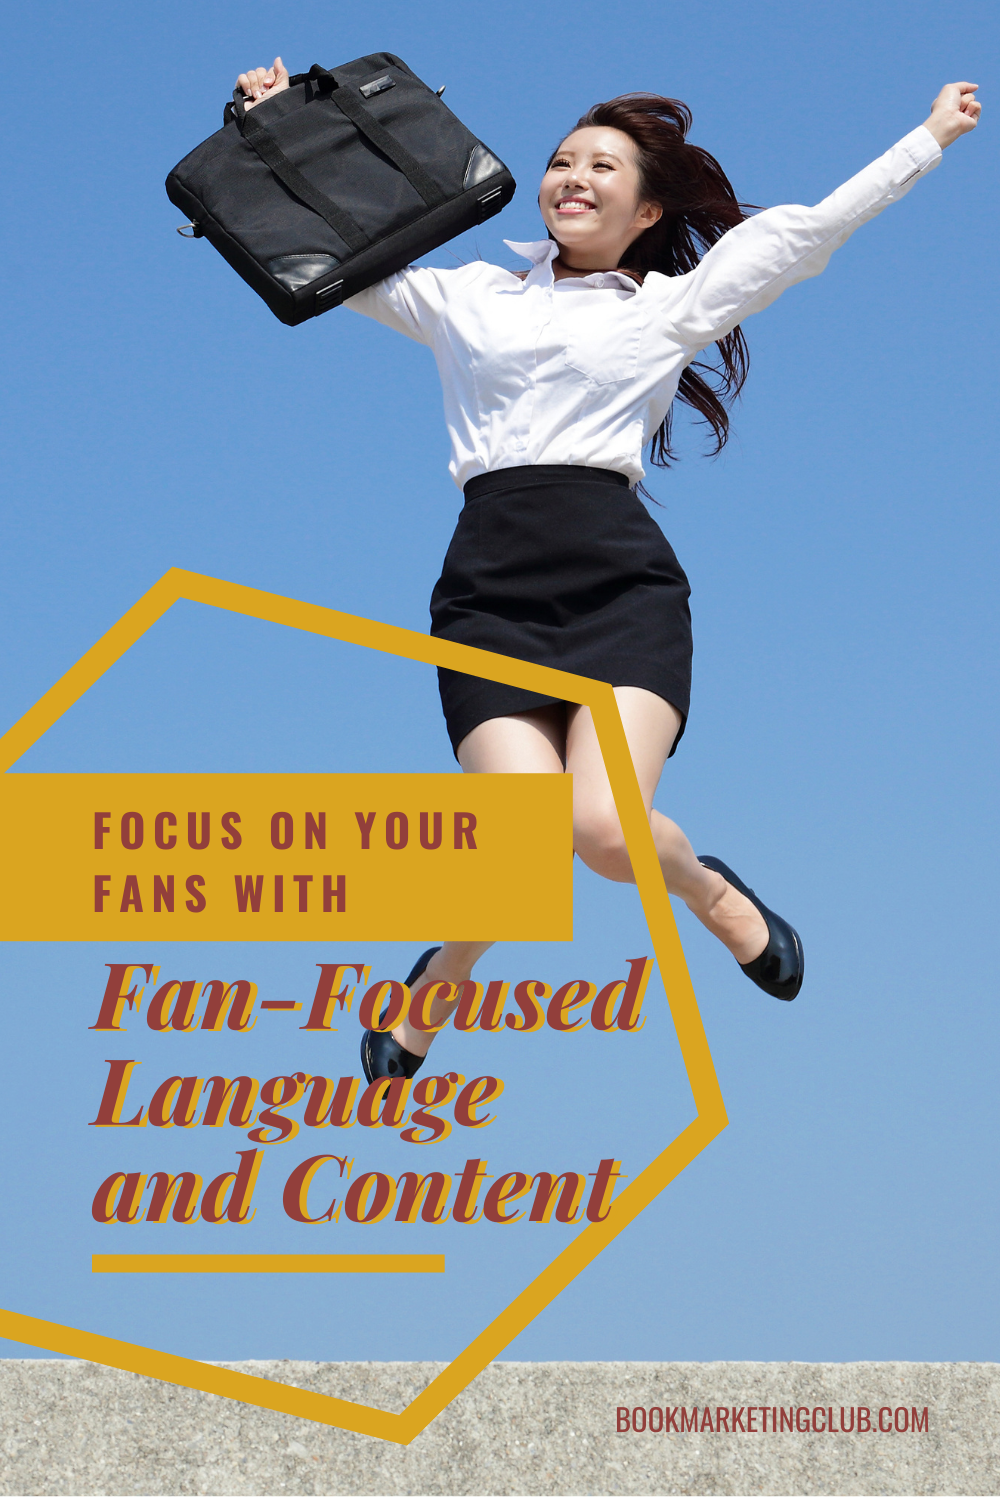 Focus on your fans with fan-focused language and content.